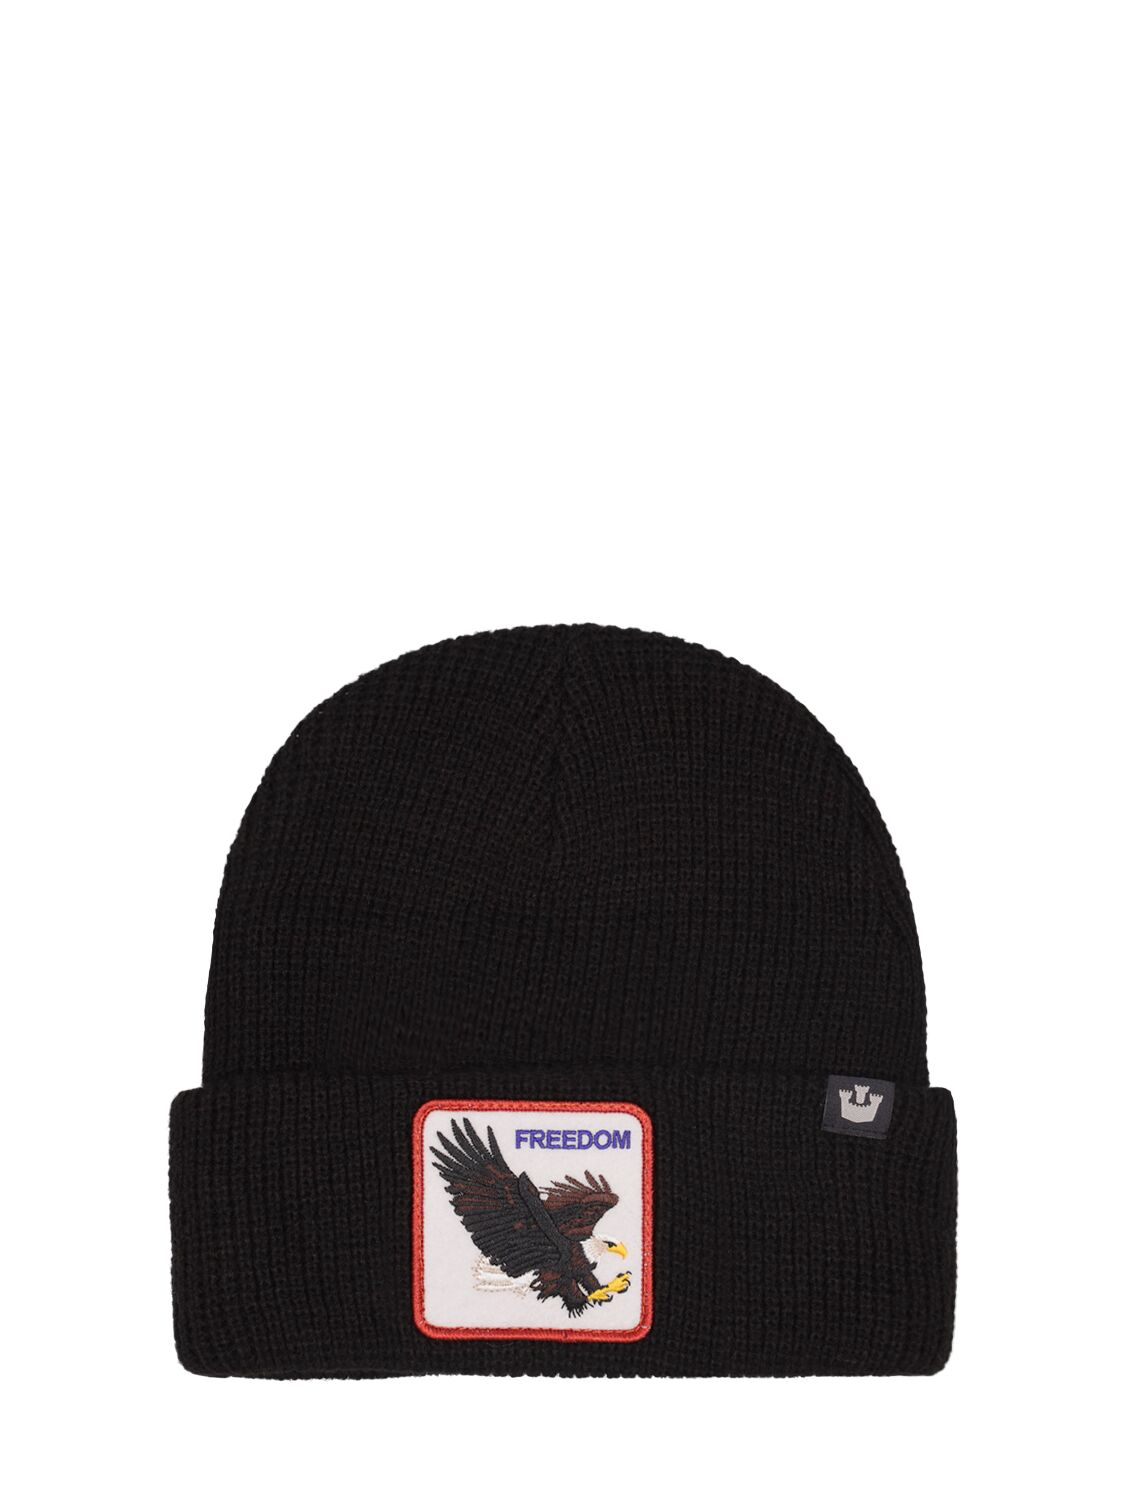 New Heights Knit Beanie